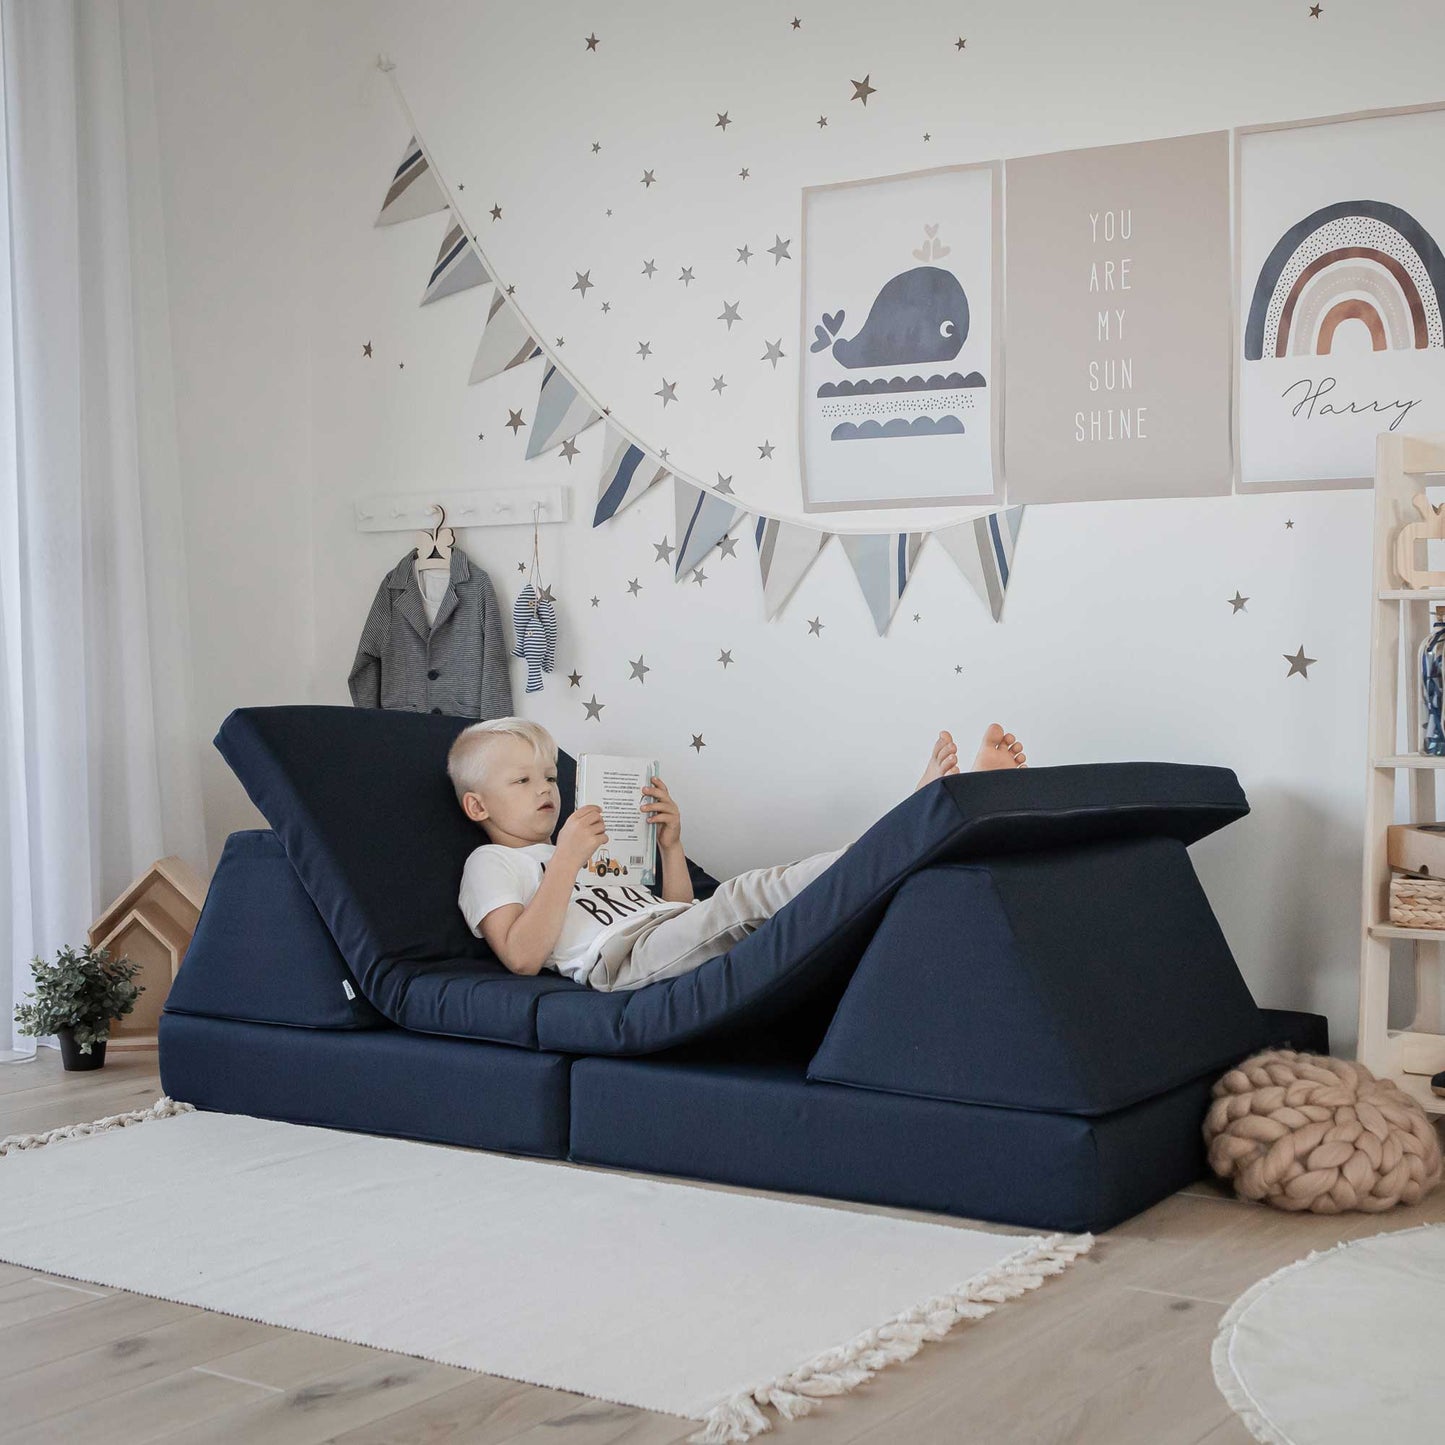 A boy relaxing and reading a book on his navy blue Monboxy play couch